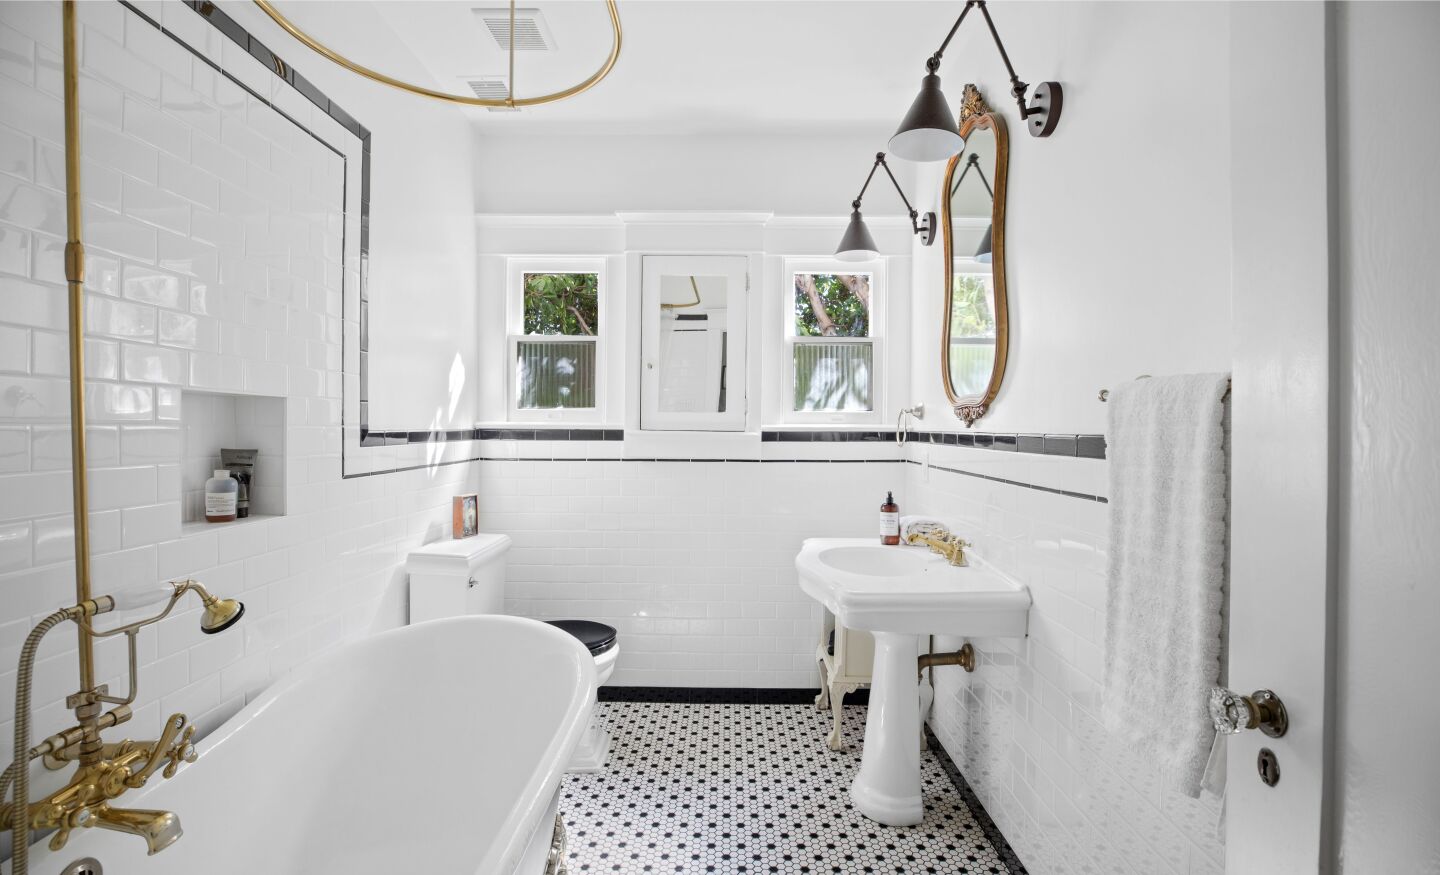 A claw-foot tub and black and white tile in a bathroom.